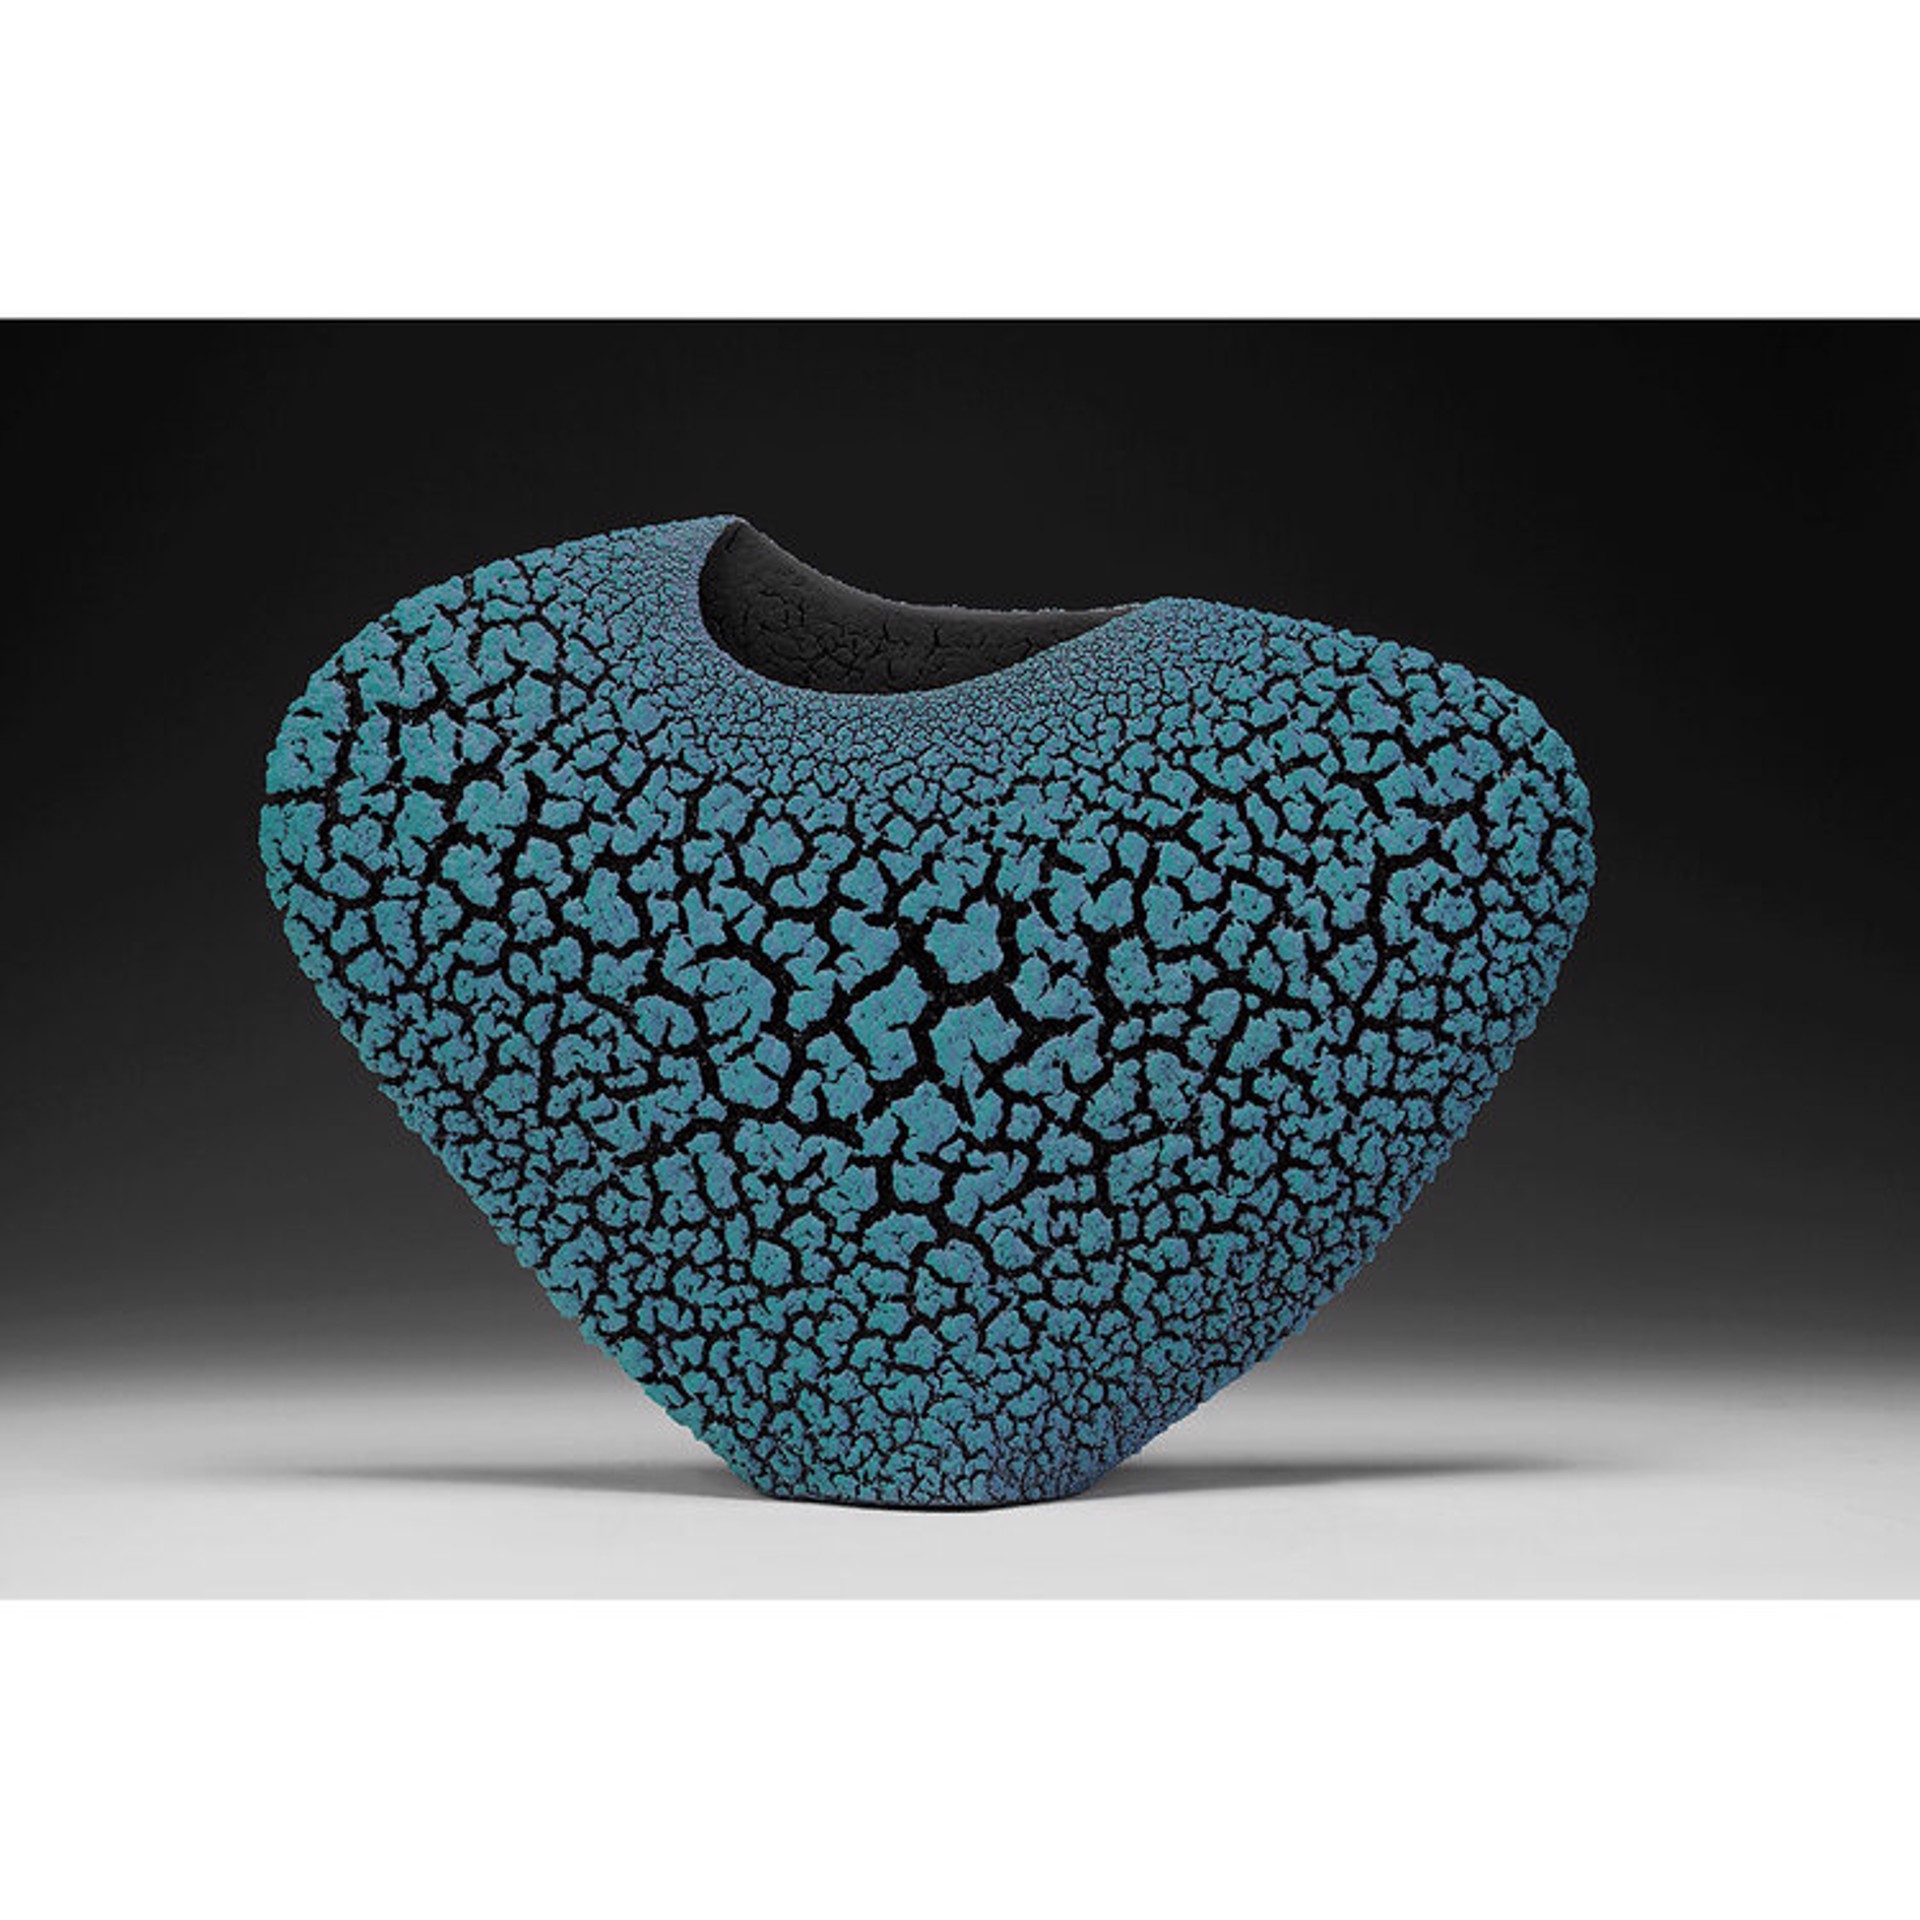 Mojave  Envelope Vessel - Turquoise Green | Peacock Blue 109 by Randy O' Brien